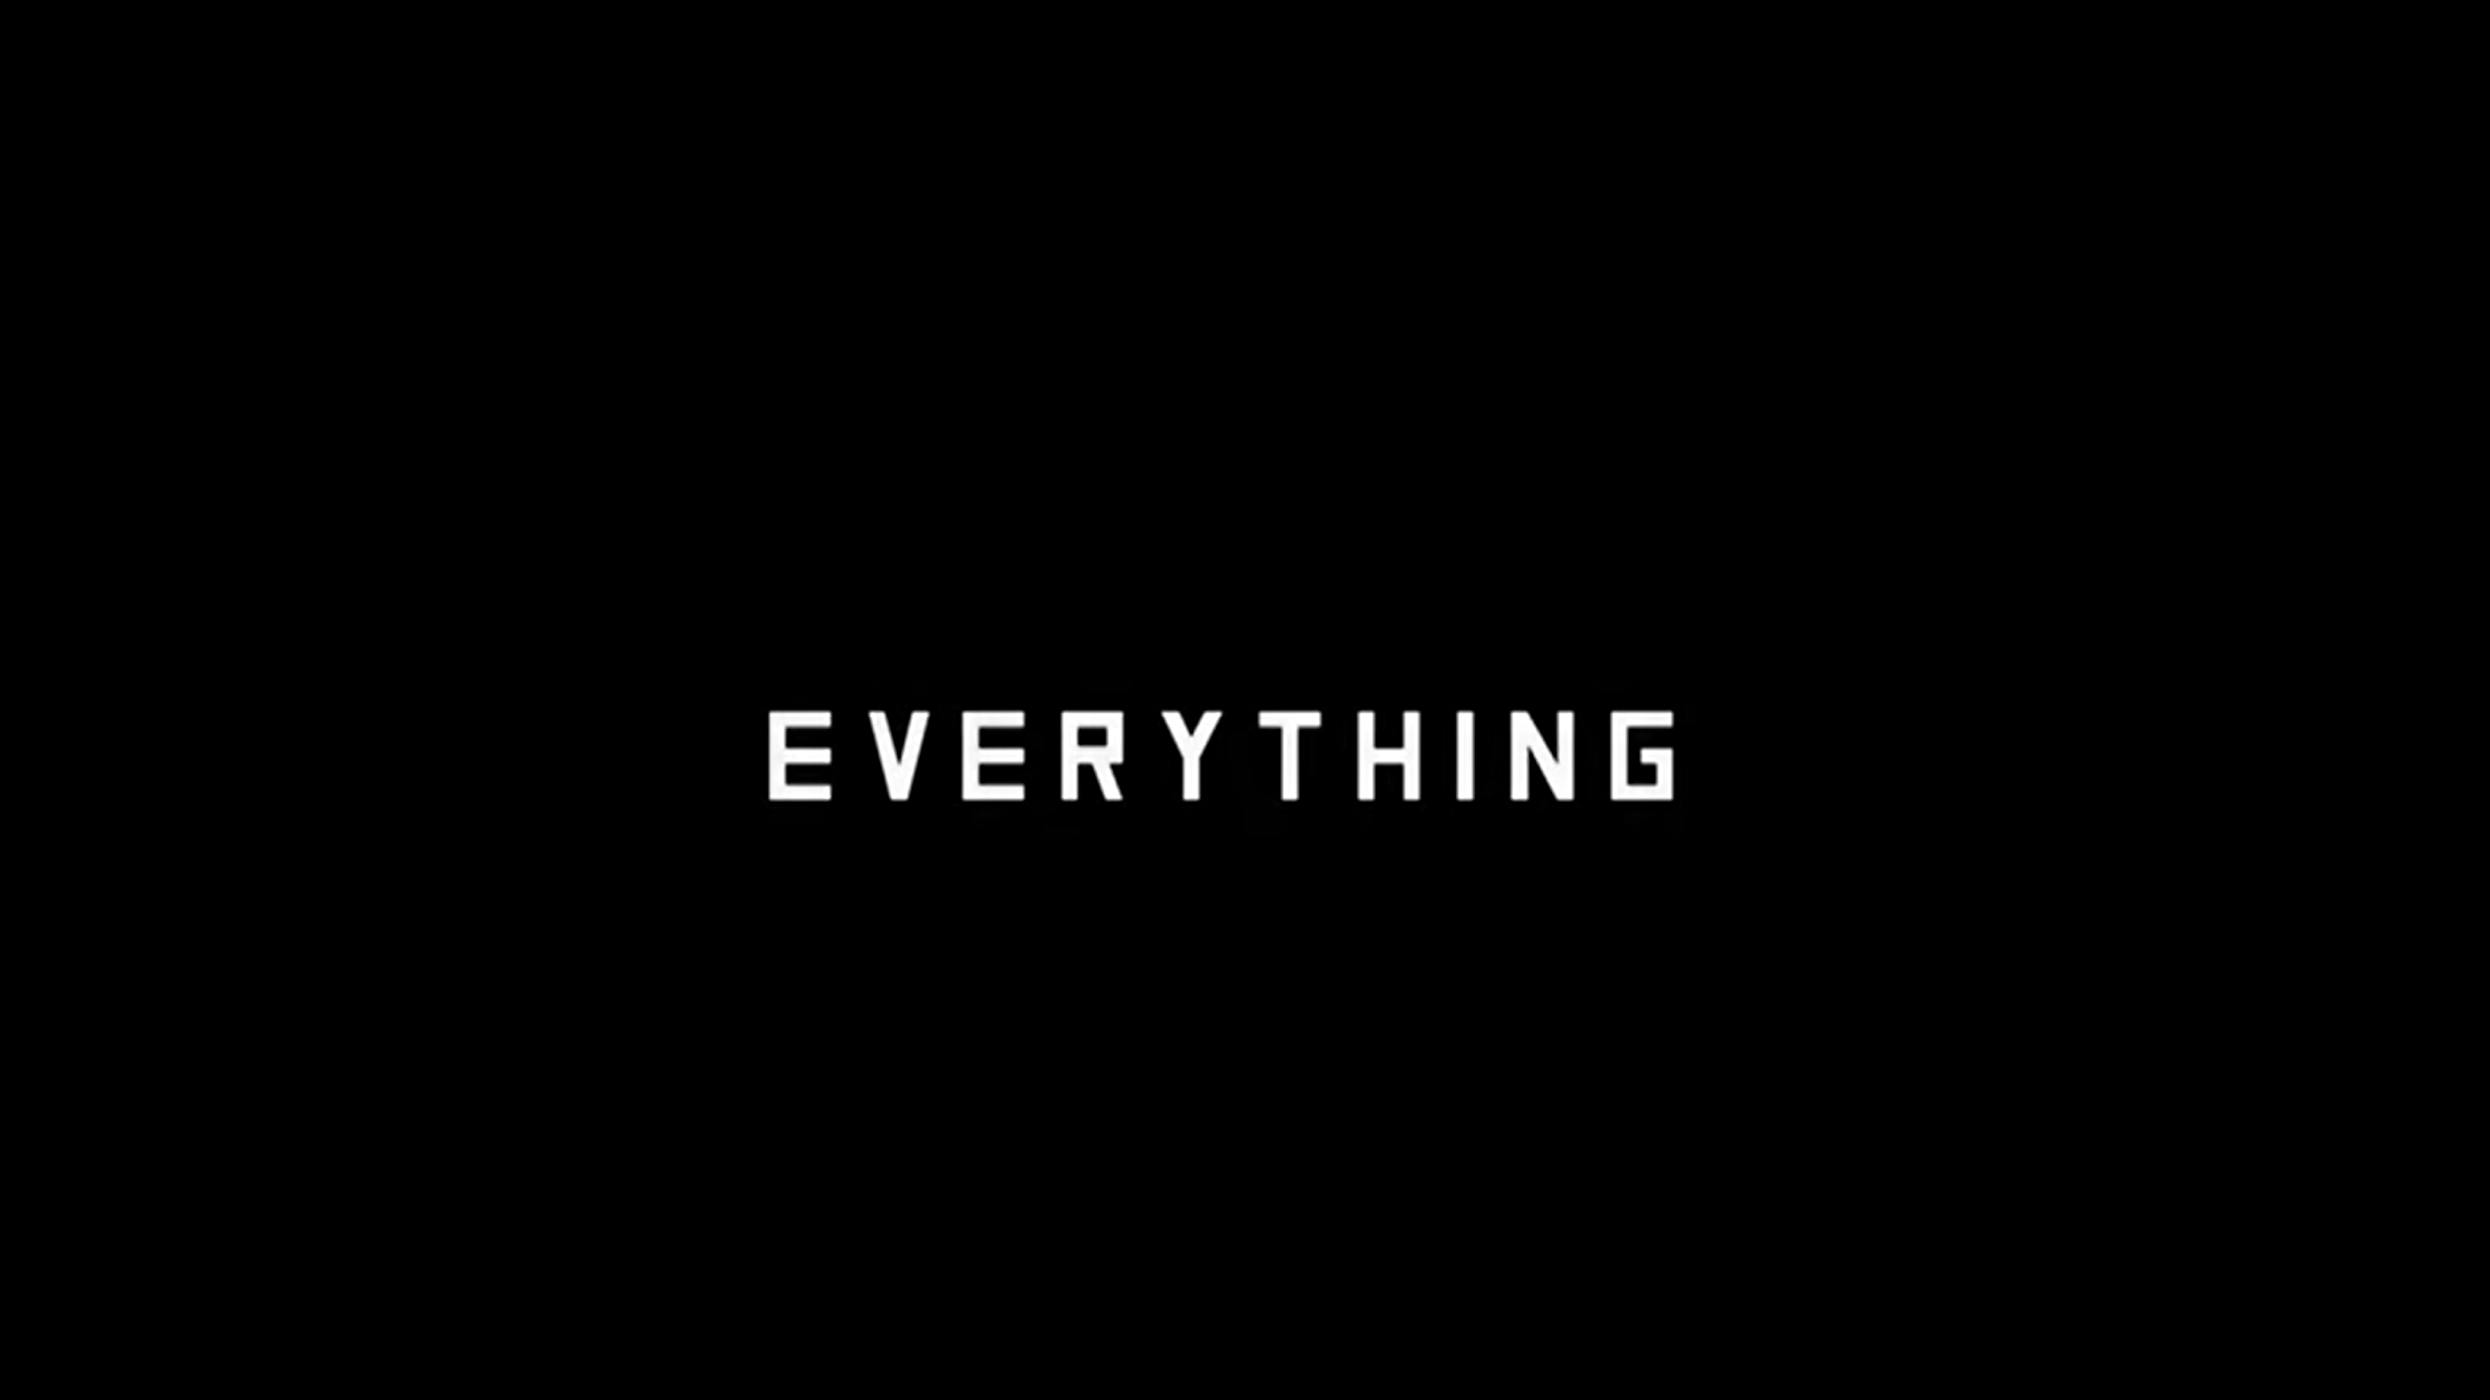 Black screen with white text that reads, "EVERYTHING"